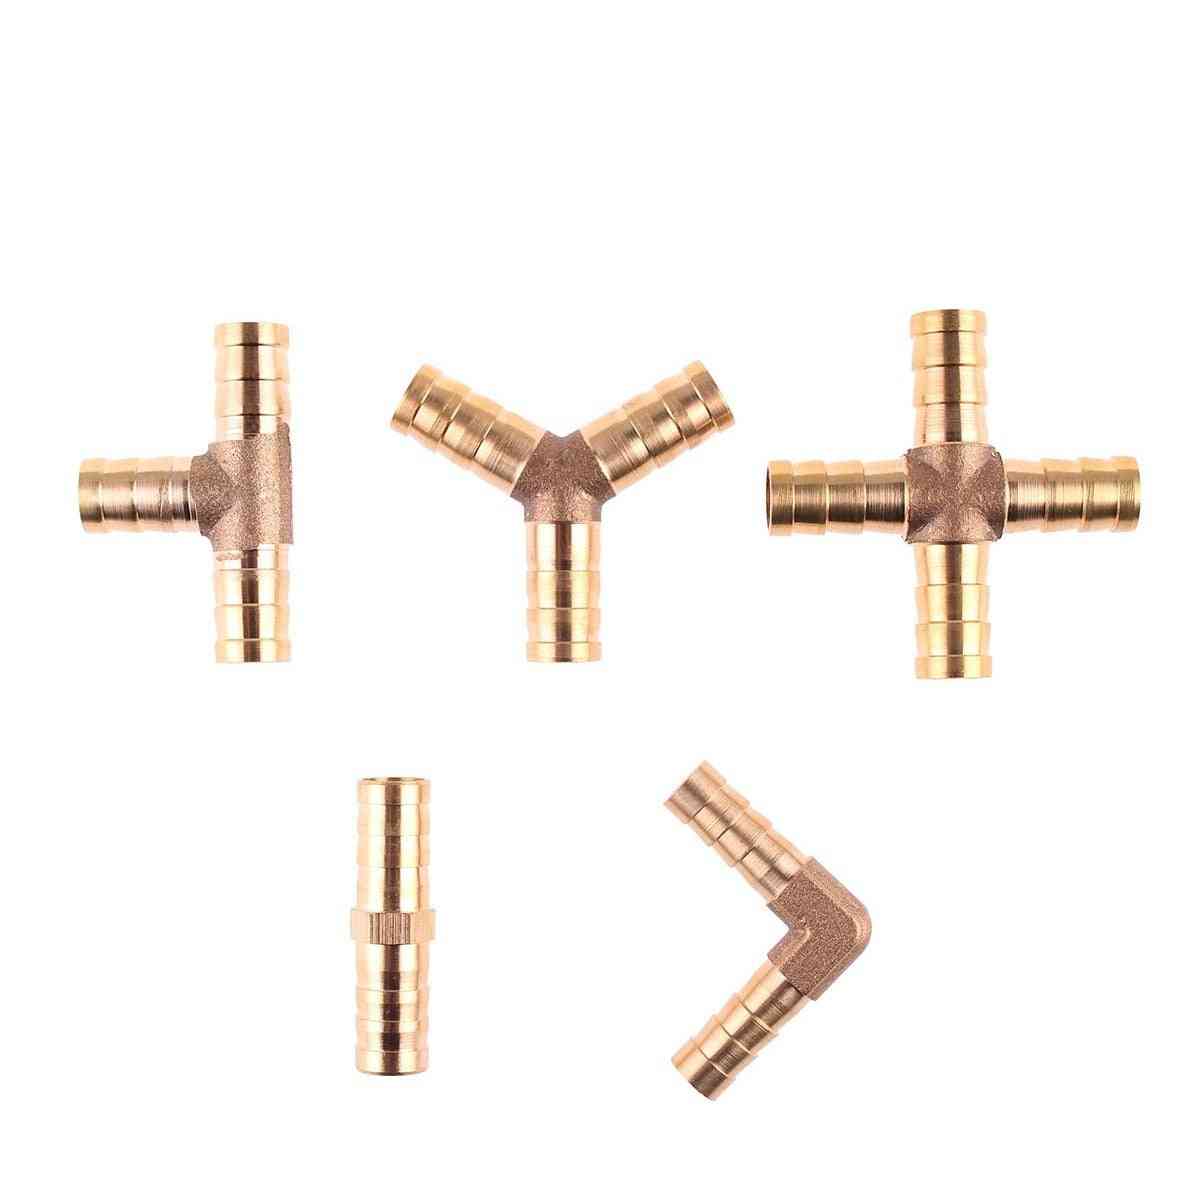 Brass Barb Pipe Fitting Straight Elbow Hose, Copper Barbed Connector Joint Coupler Adapter